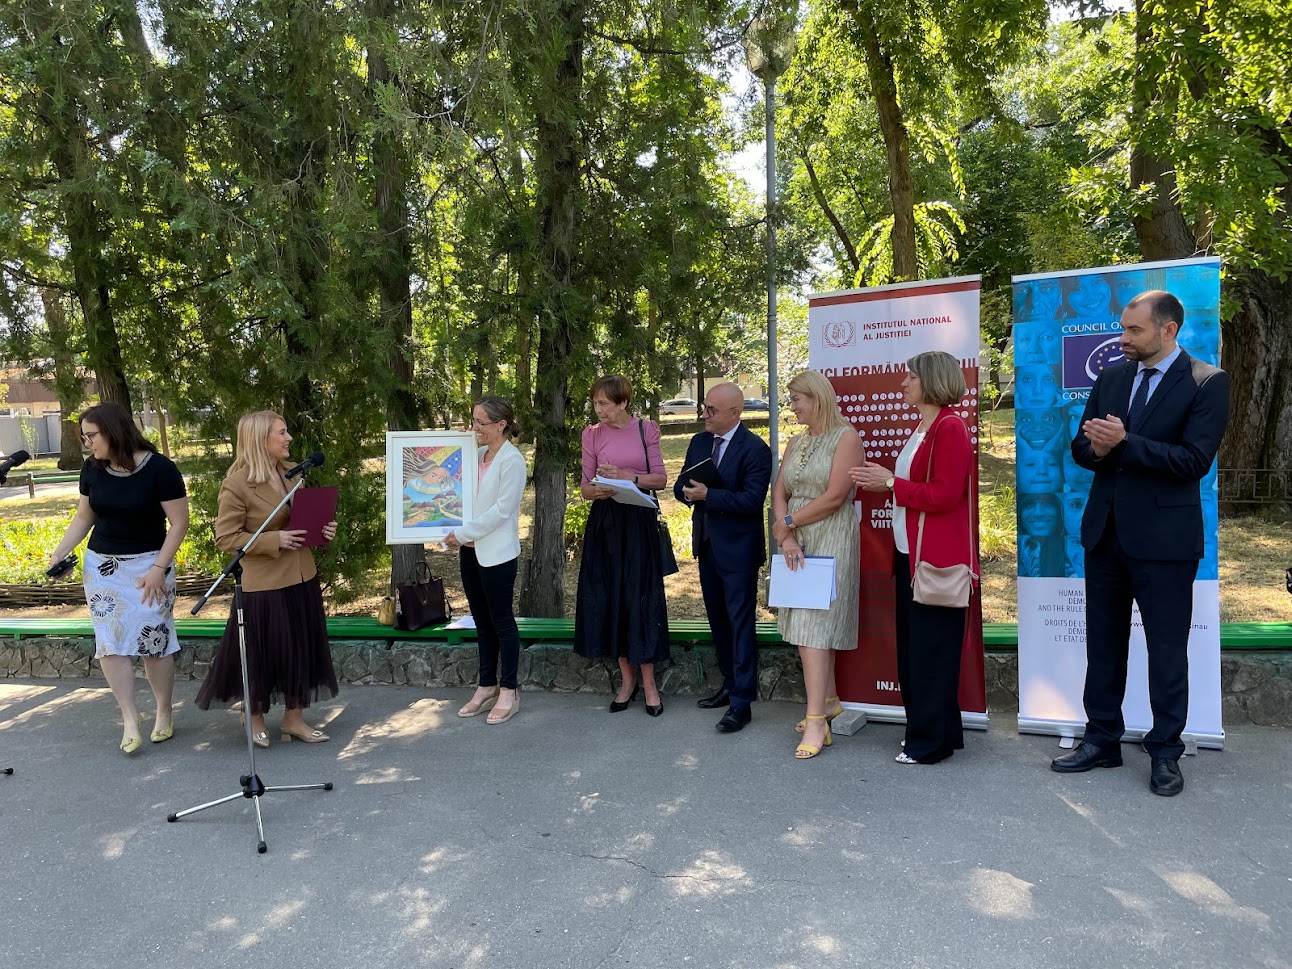 Council of Europe Week in the Republic of Moldova 2023 launched with an art exhibition in the Council of Europe square in Chisinau